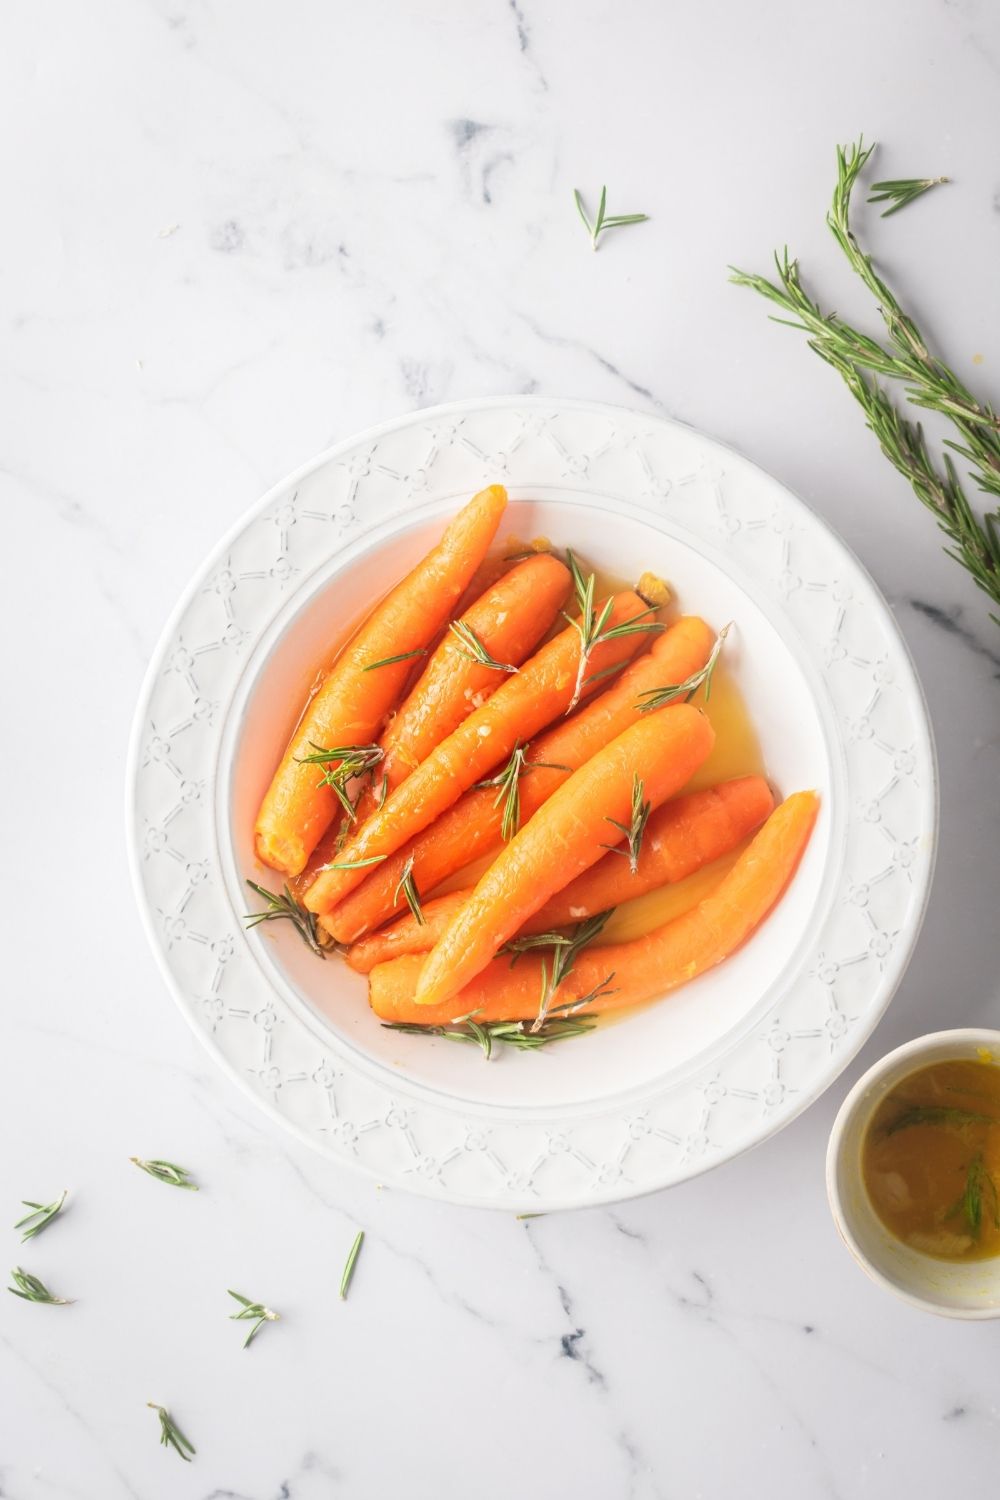 A bunch of carrots with rosemary sprigs on top in a white bowl on the white counter.